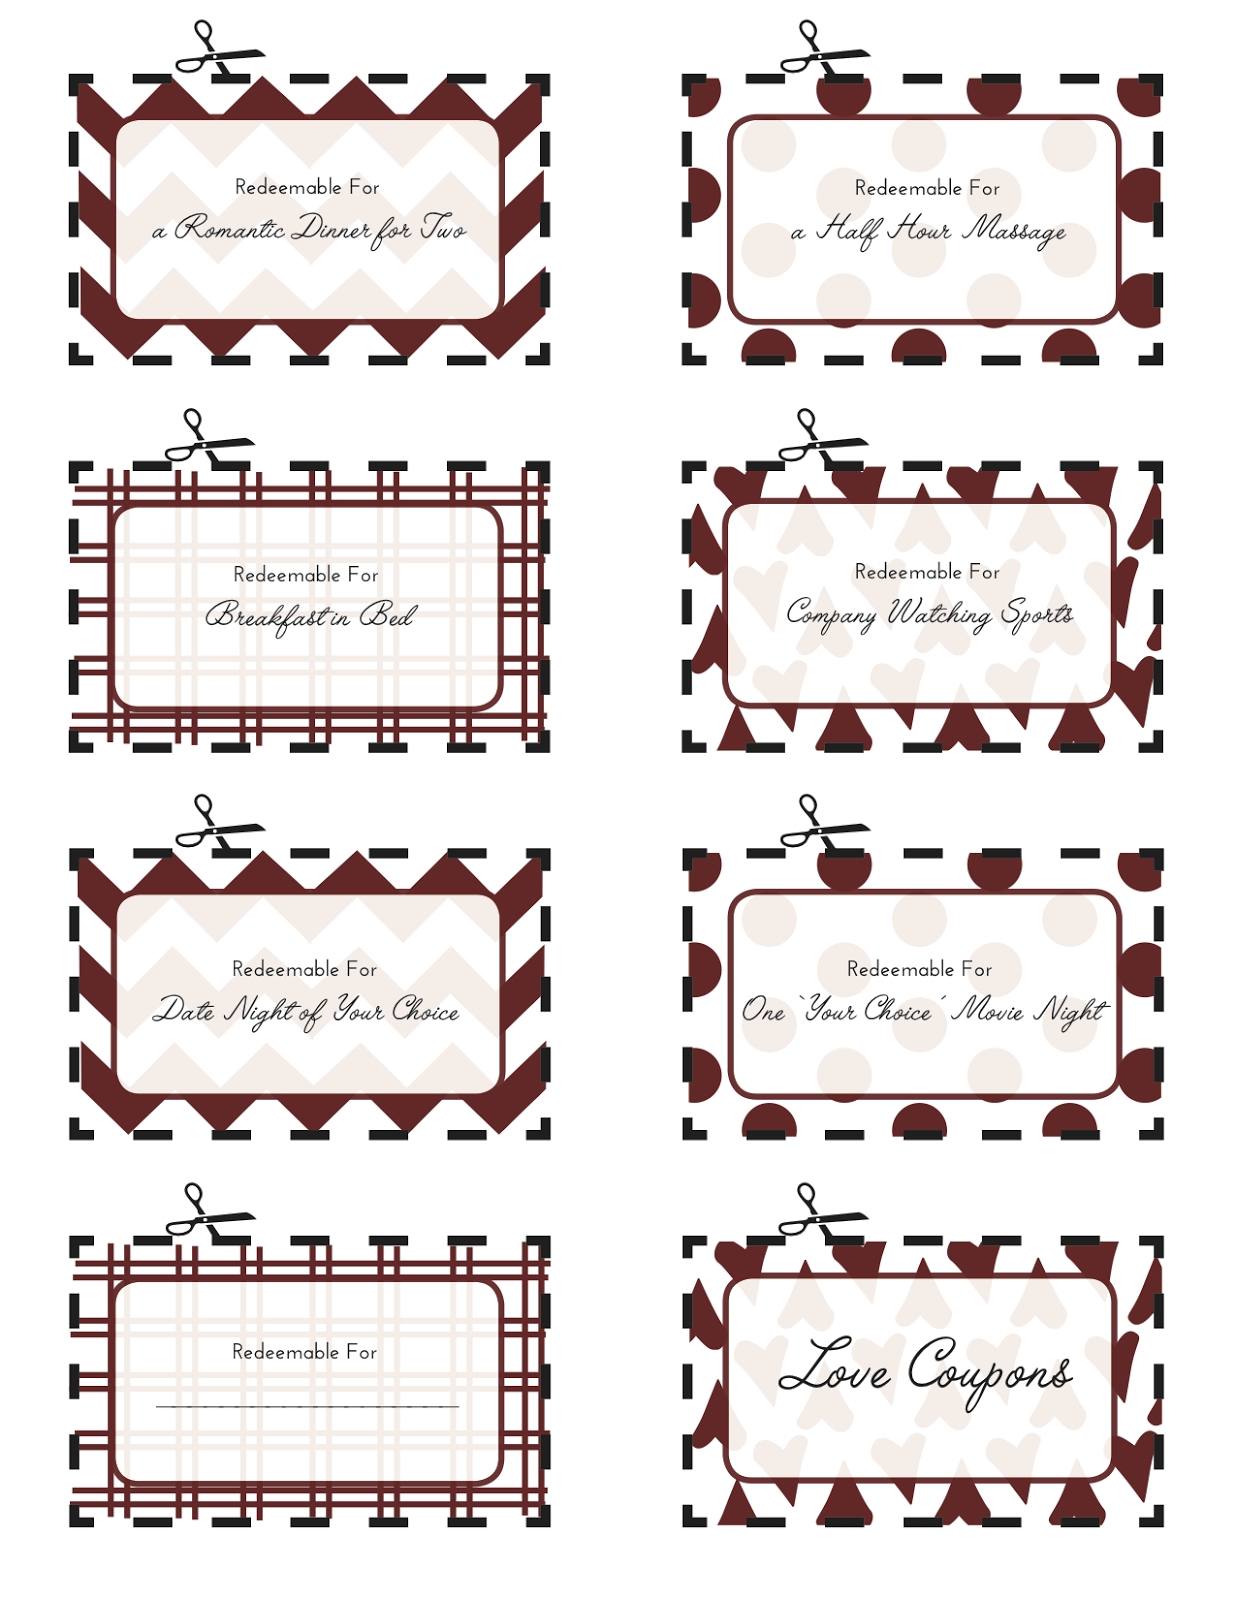 Sincerely Jenna Marie | A St. Louis Life And Style Blog: Printable With Regard To Love Coupon Template For Word